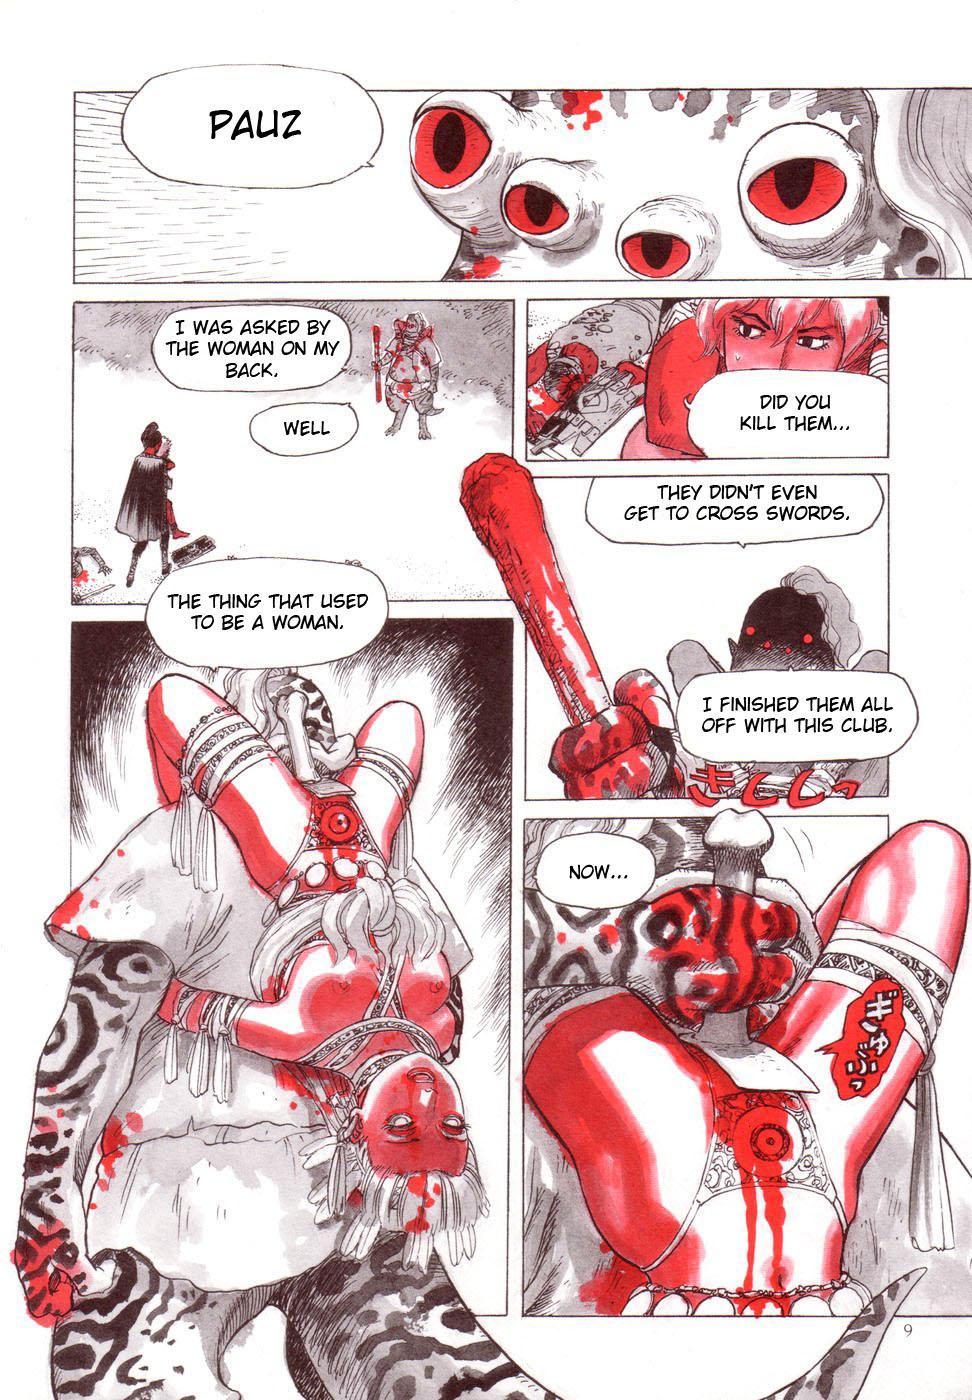 Ano Rotten Sword Cam Girl - Page 9